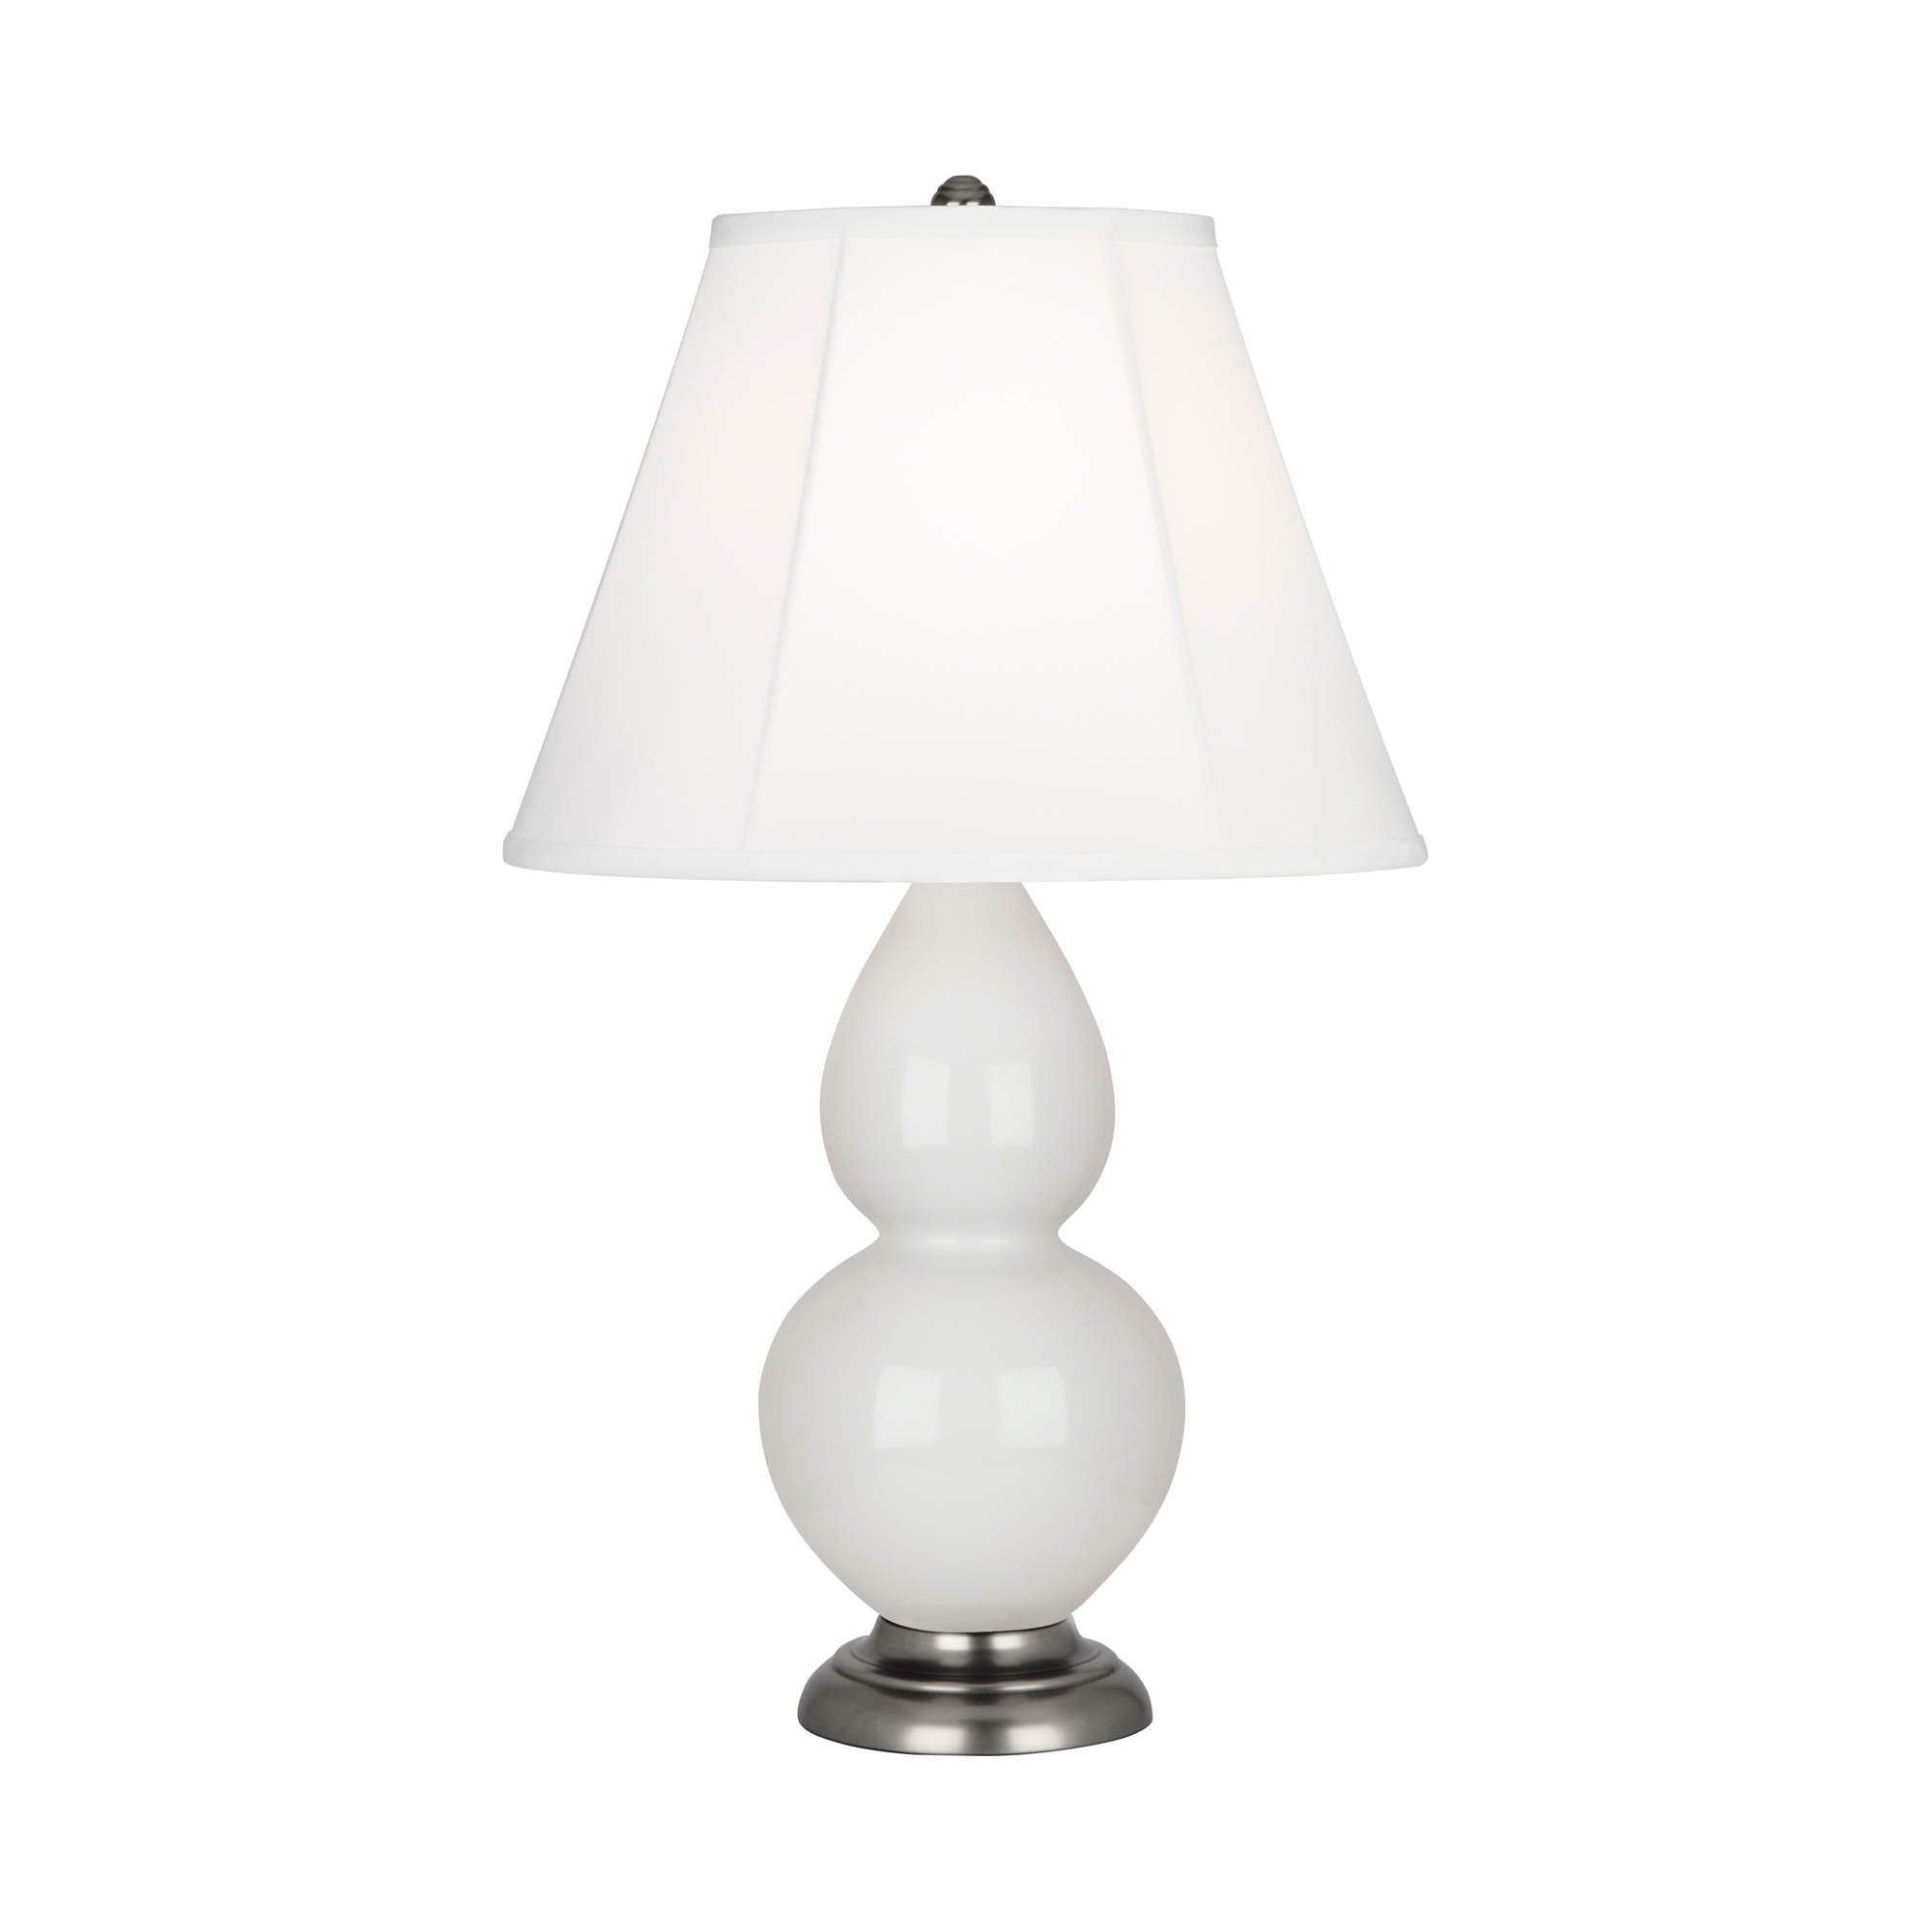 Small Double Gourd Accent Lamp Style #1690